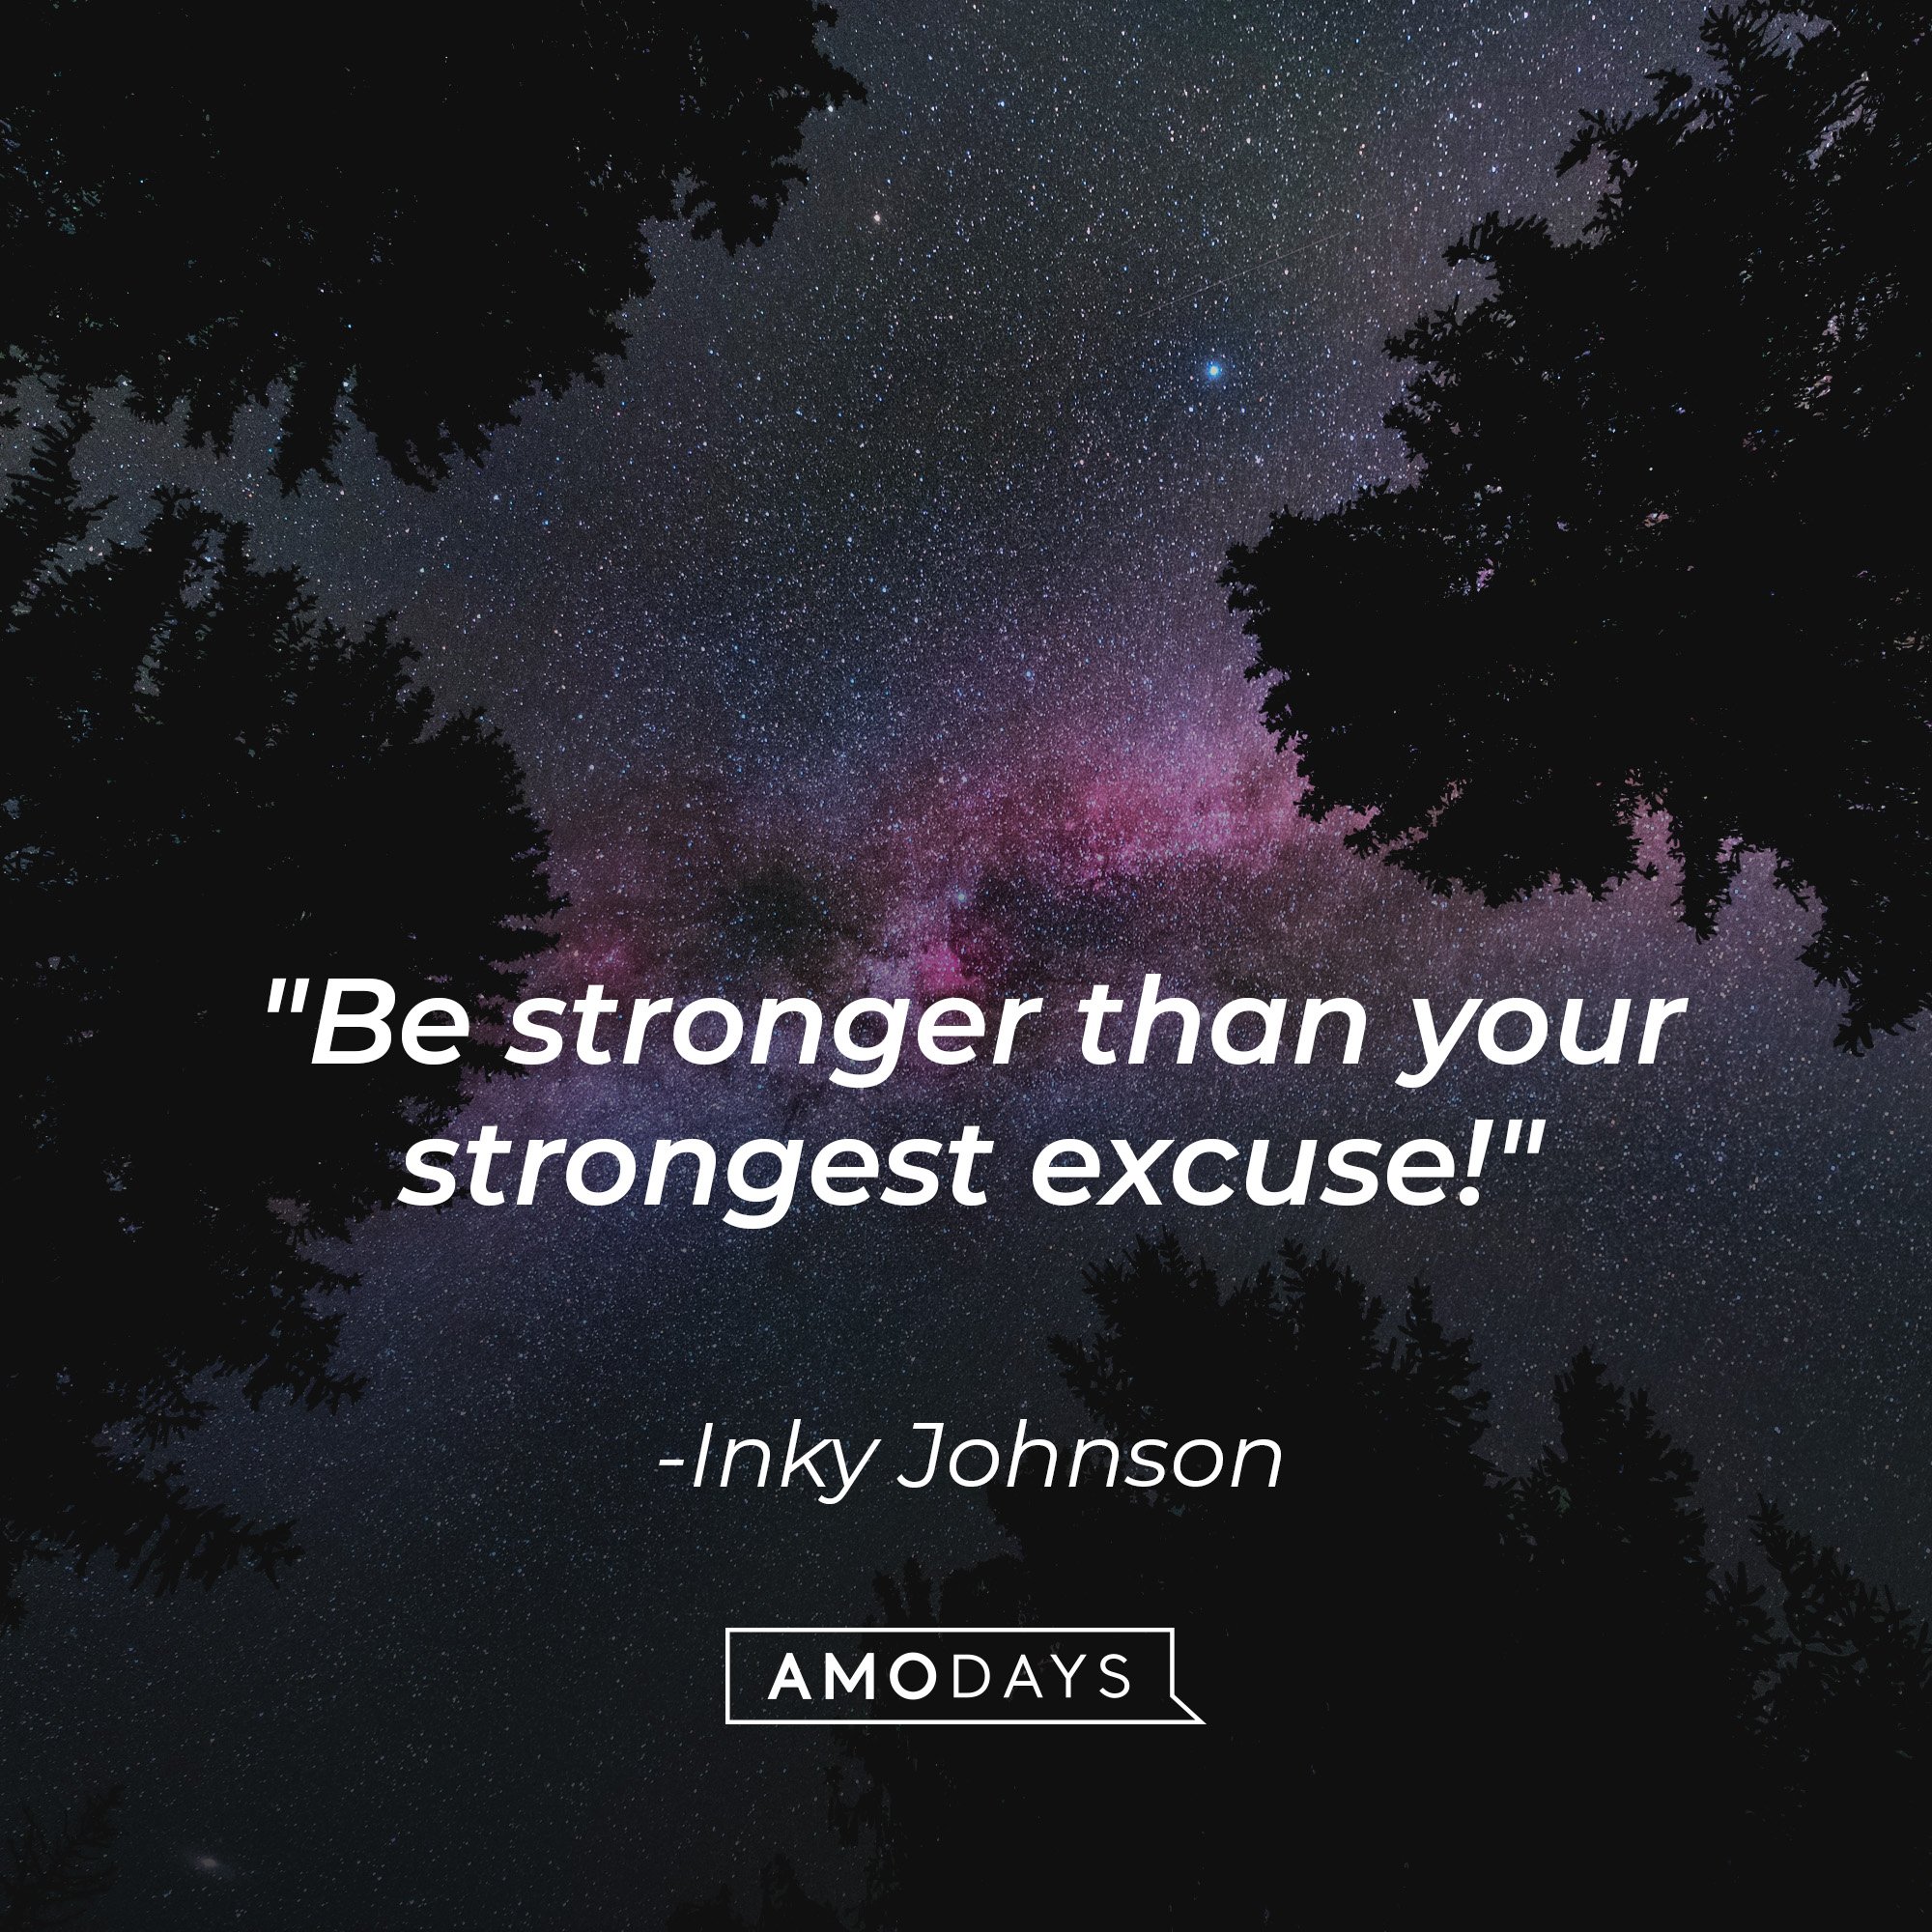 Inky Johnson's quote: "Be stronger than your strongest excuse!" | Image: AmoDays